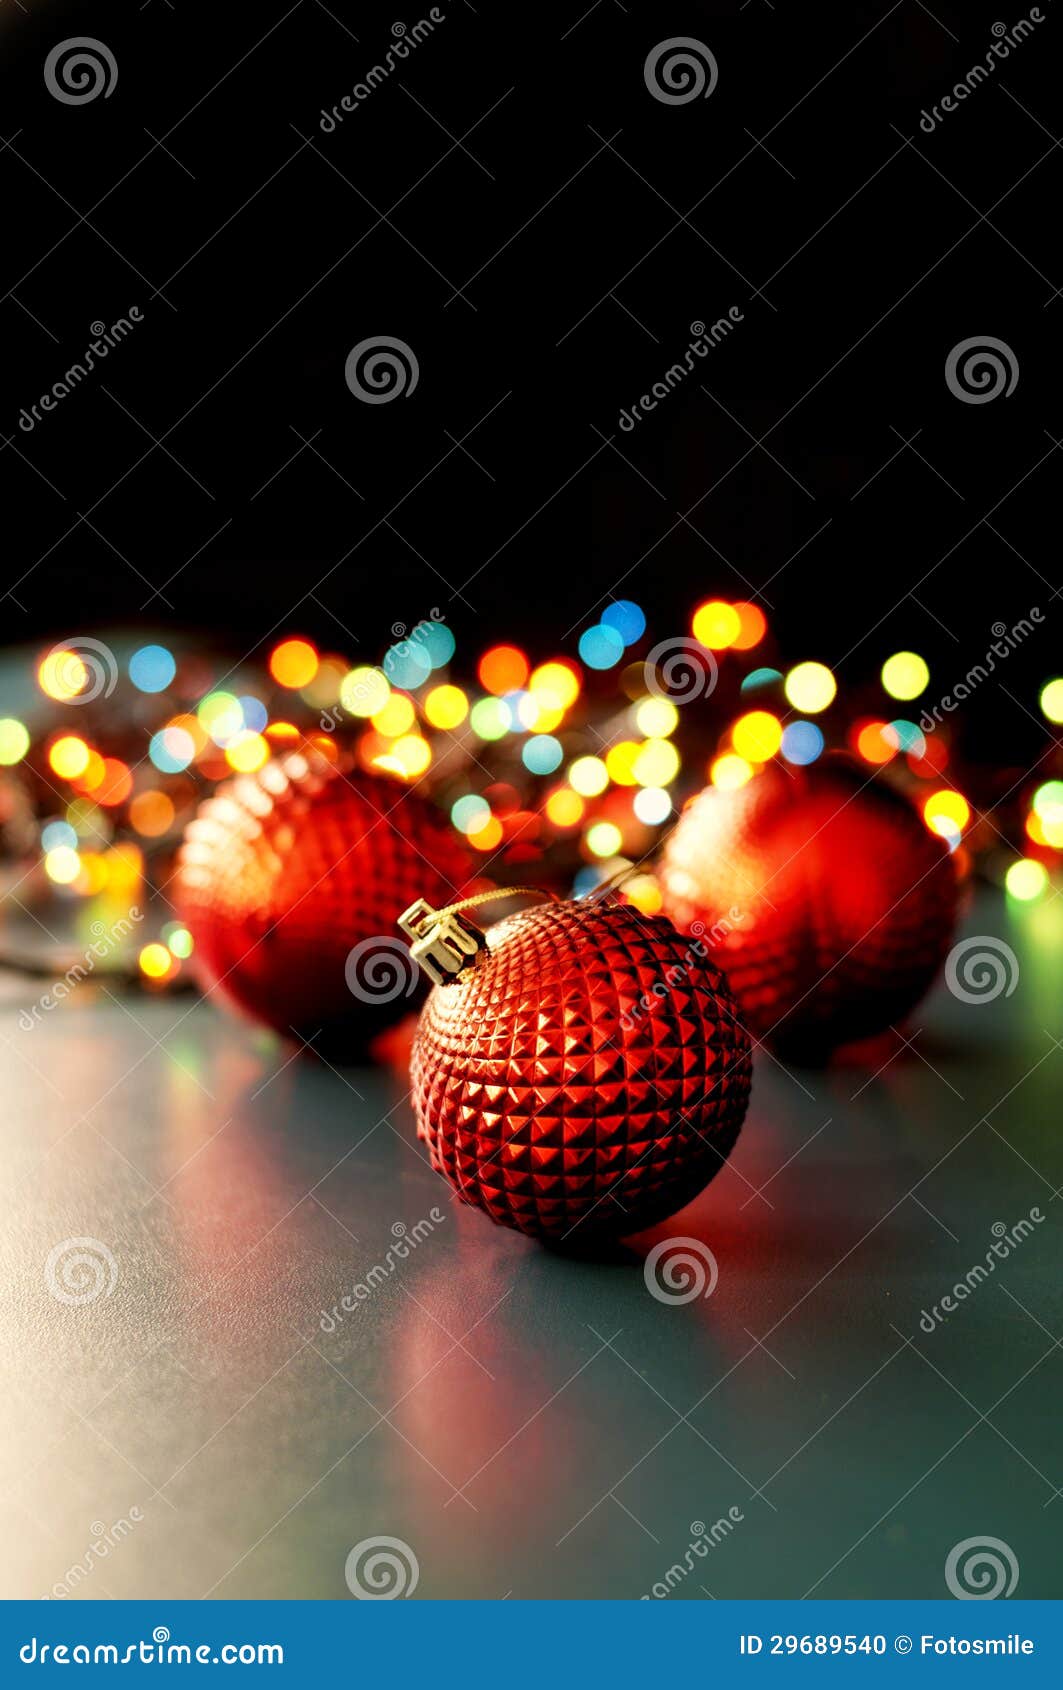 Christmas Ornaments and Lights Stock Photo - Image of round, greeting ...